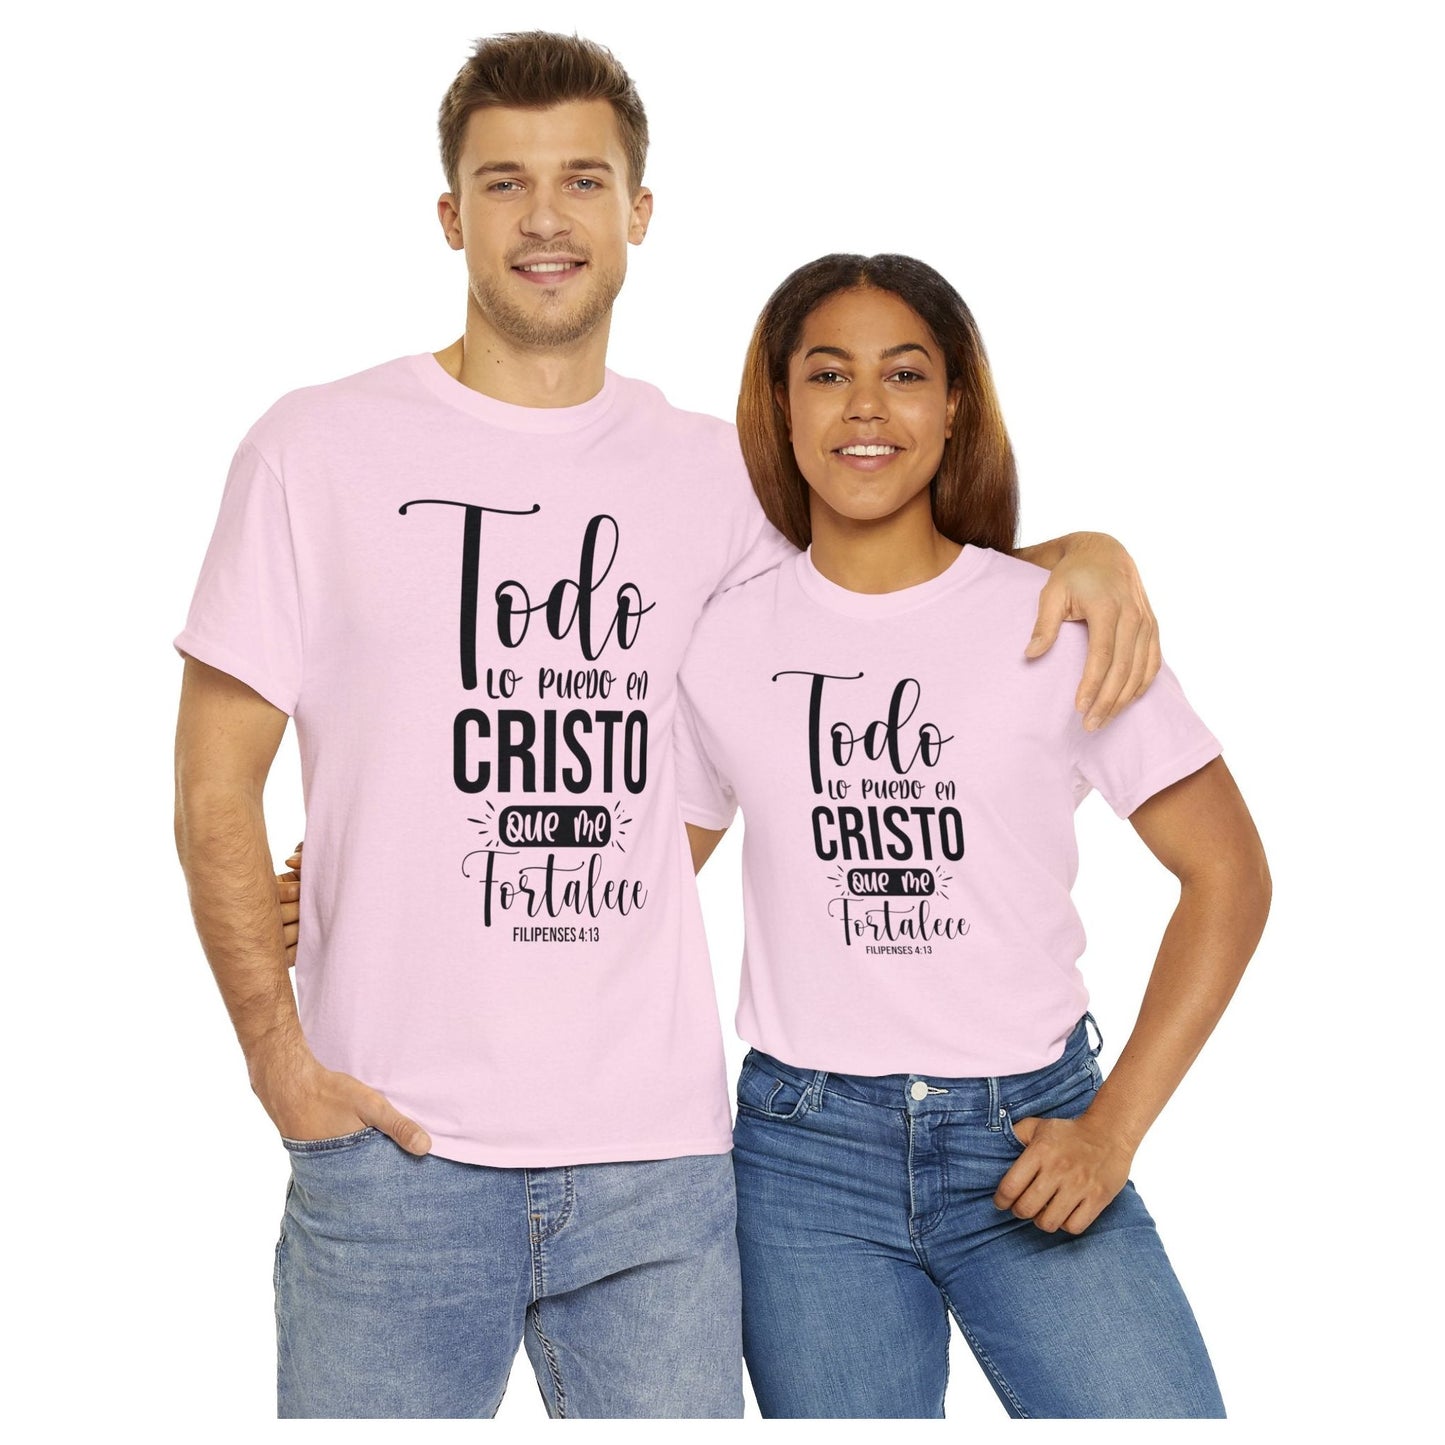 Christian T-shirt - I can do all things through Christ who strengthens me